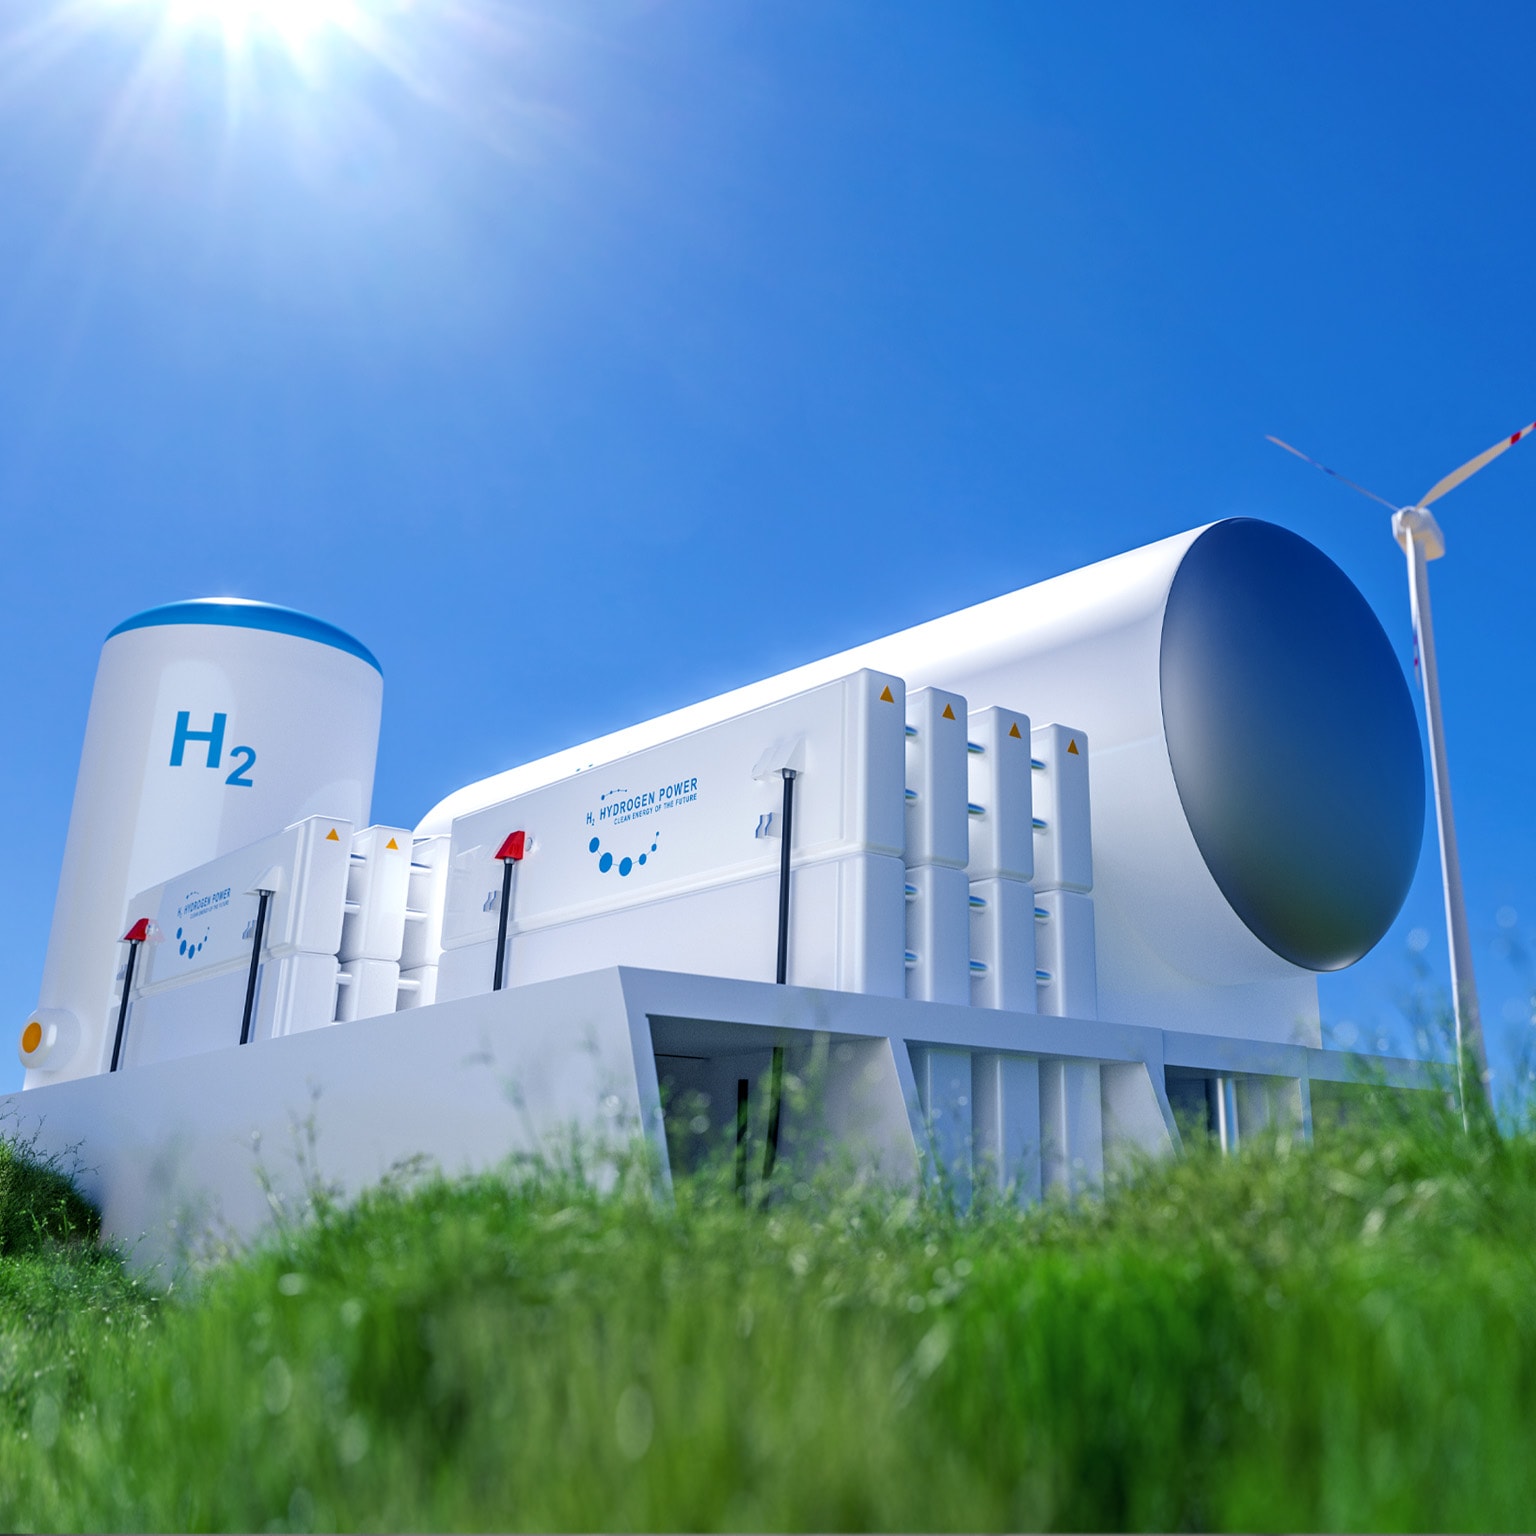 3D rendering of hydrogen energy tanks in a green field with wind turbines behind it